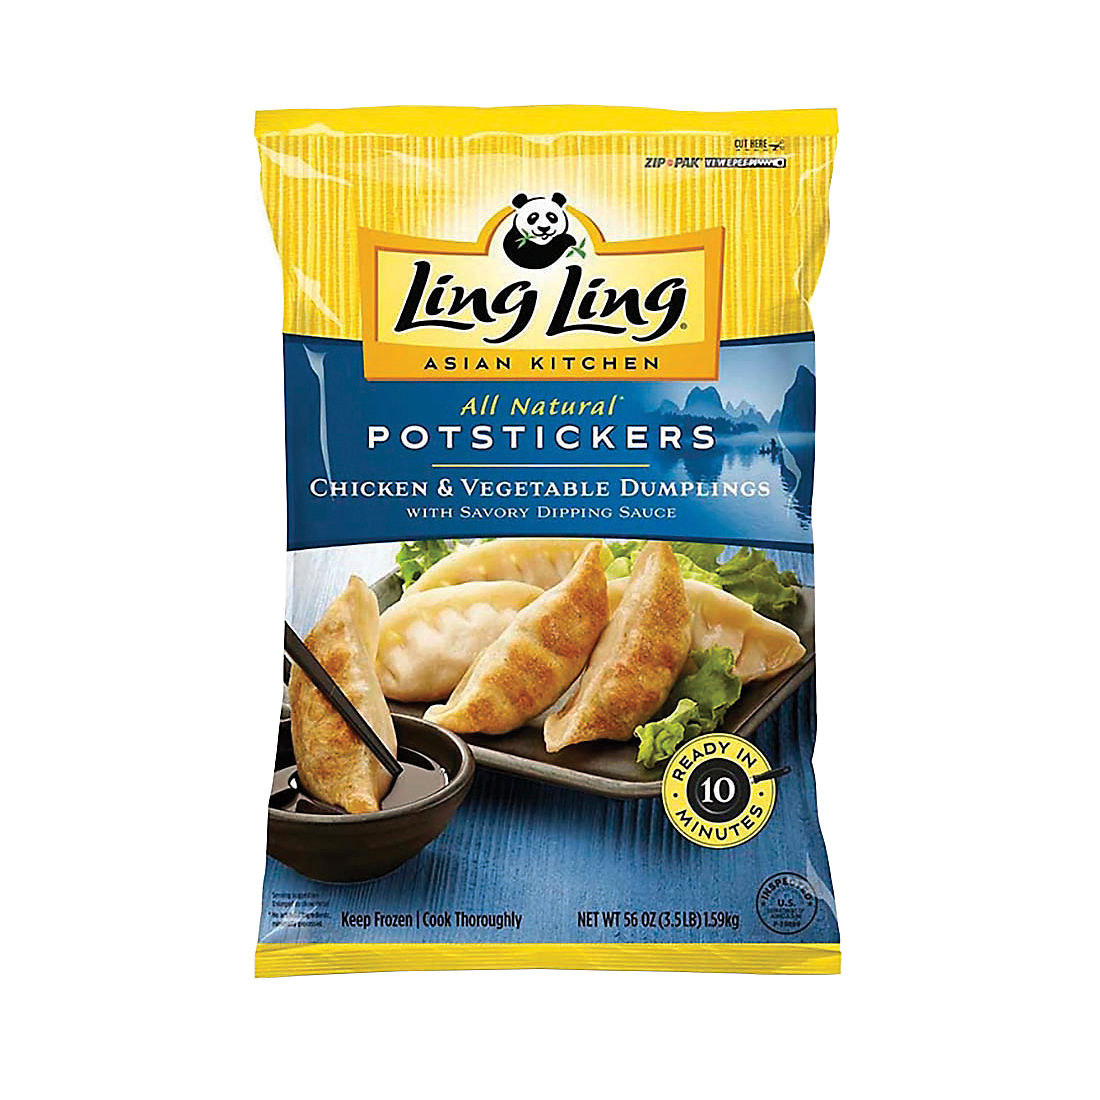 Ling Ling potstickers Chicken and Vegetable   BJs WholeSale Club